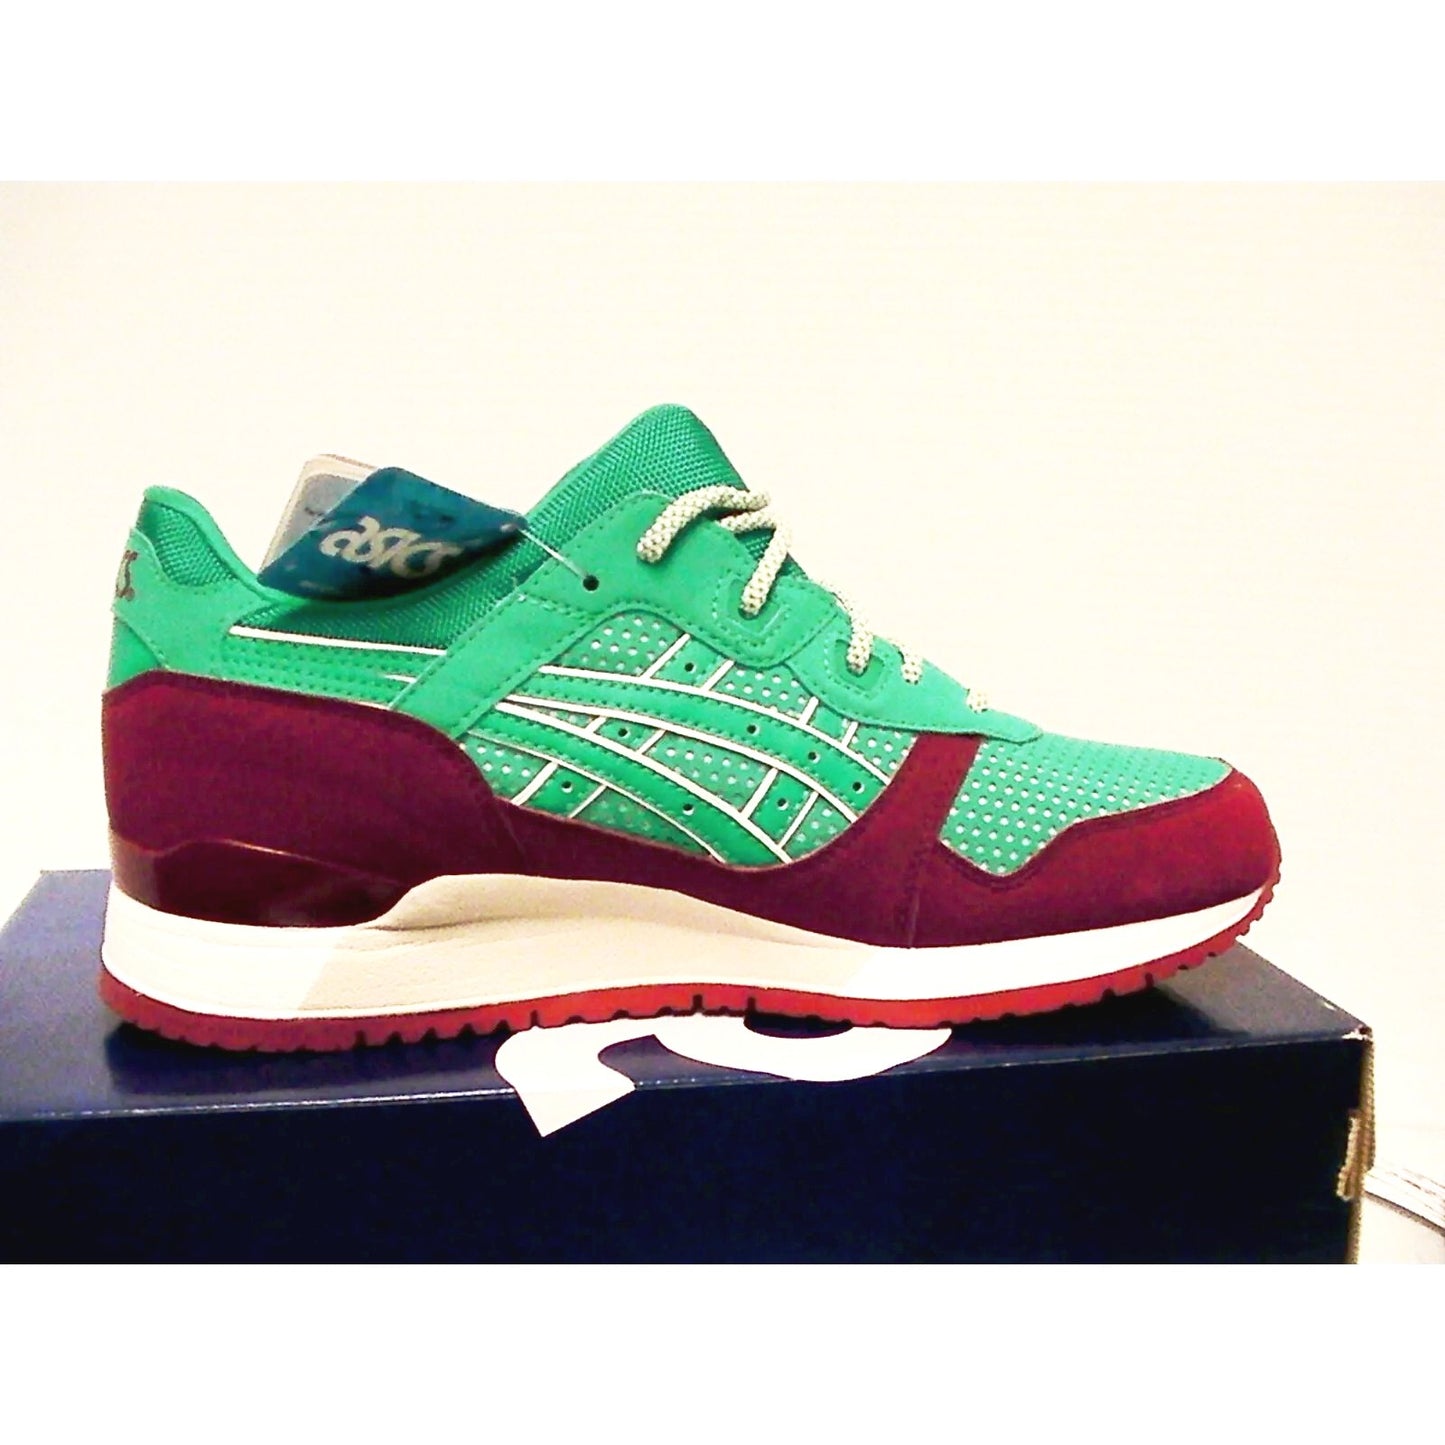 Asics men running shoes gel-lyte iii size 8.5 us spectra green new with box - Classic Fashion Deals